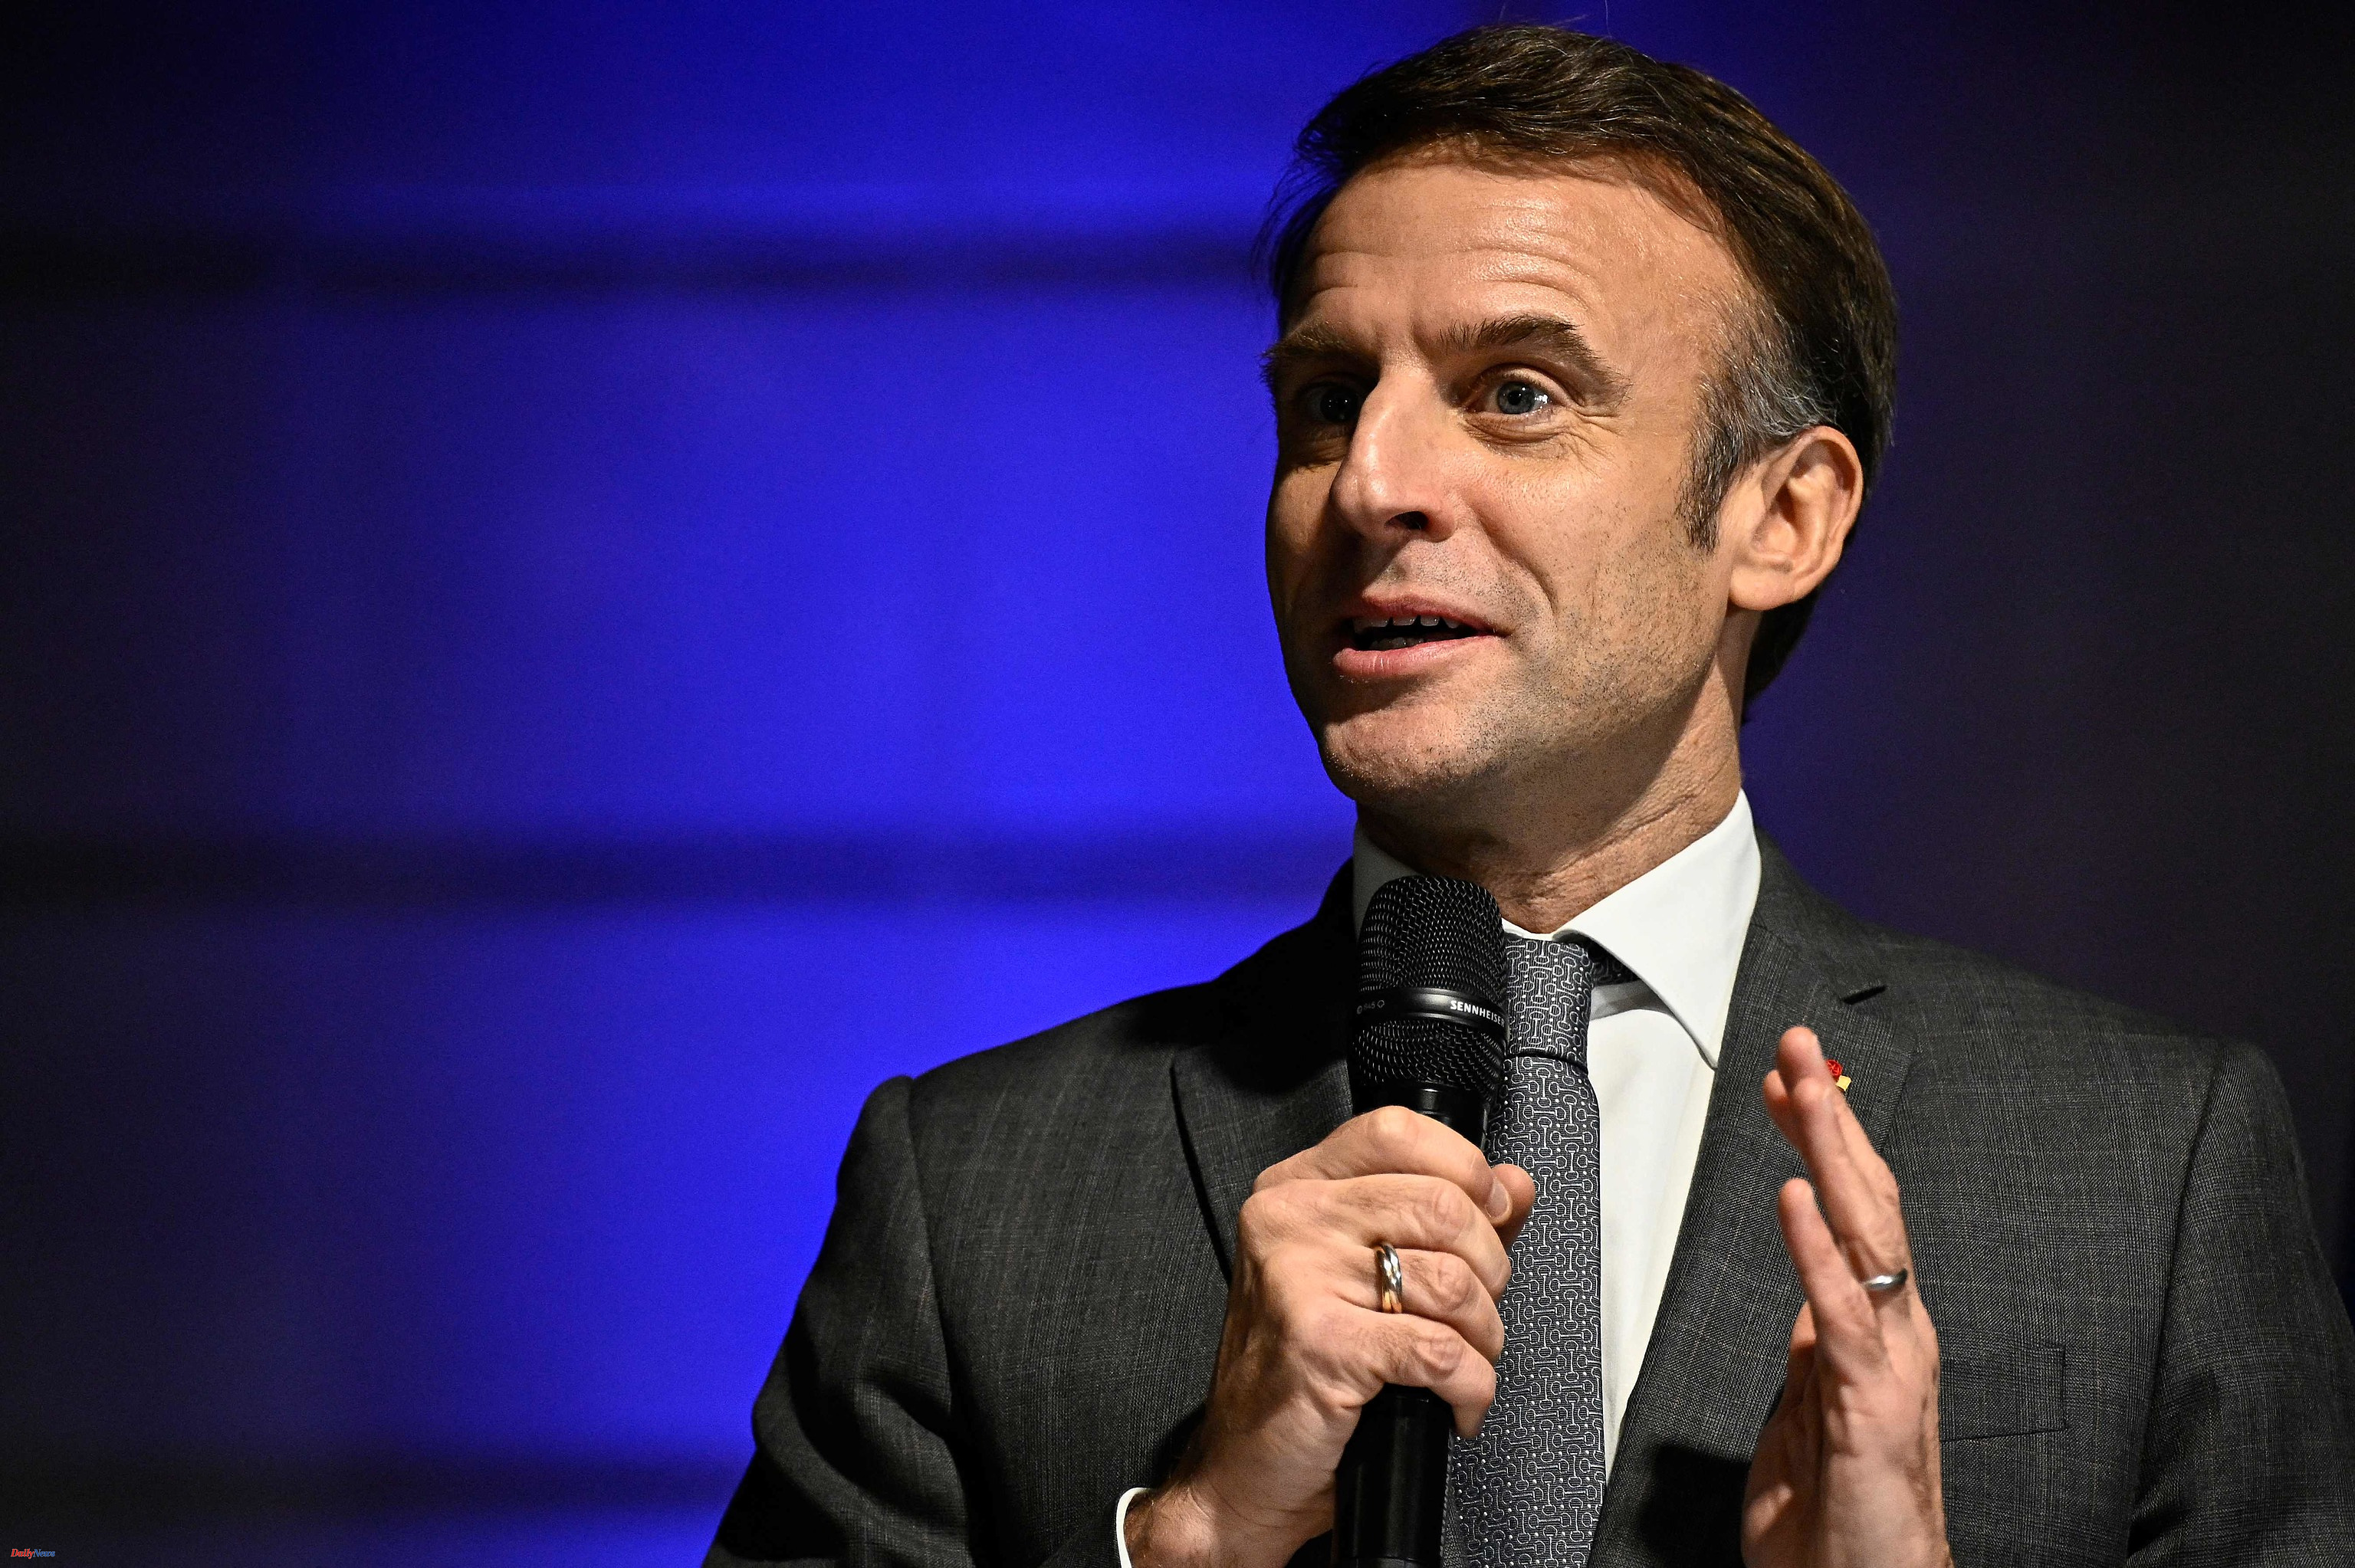 International The immigration law creates a new political crisis in France and opens cracks within Macronism